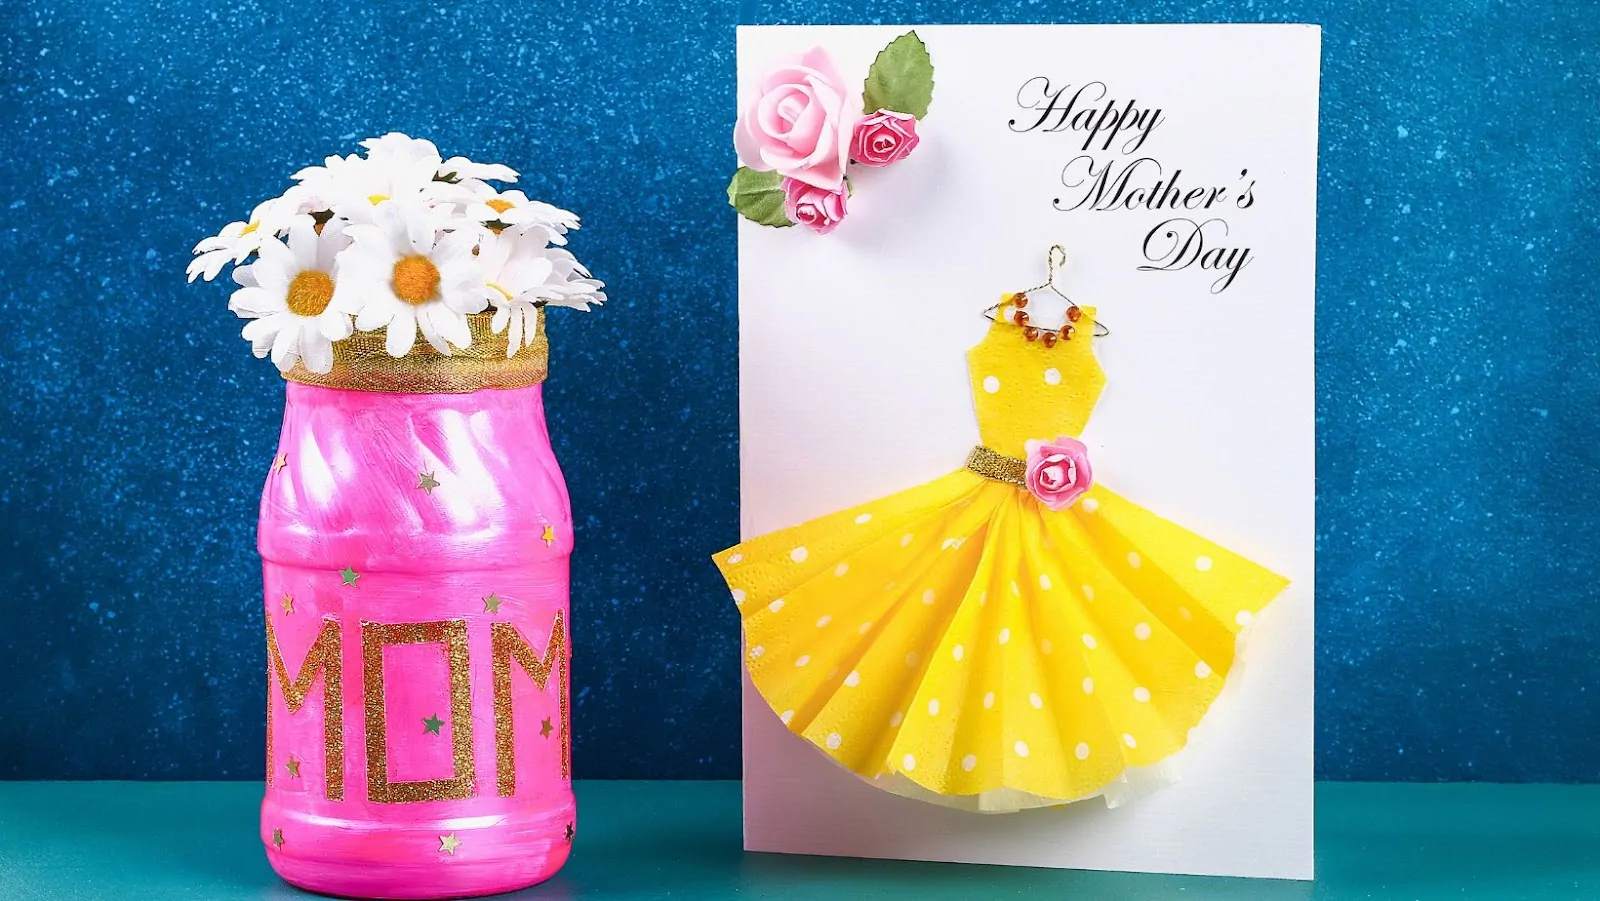 Impress Mom With These DIY Funny Mother’s Day Gifts